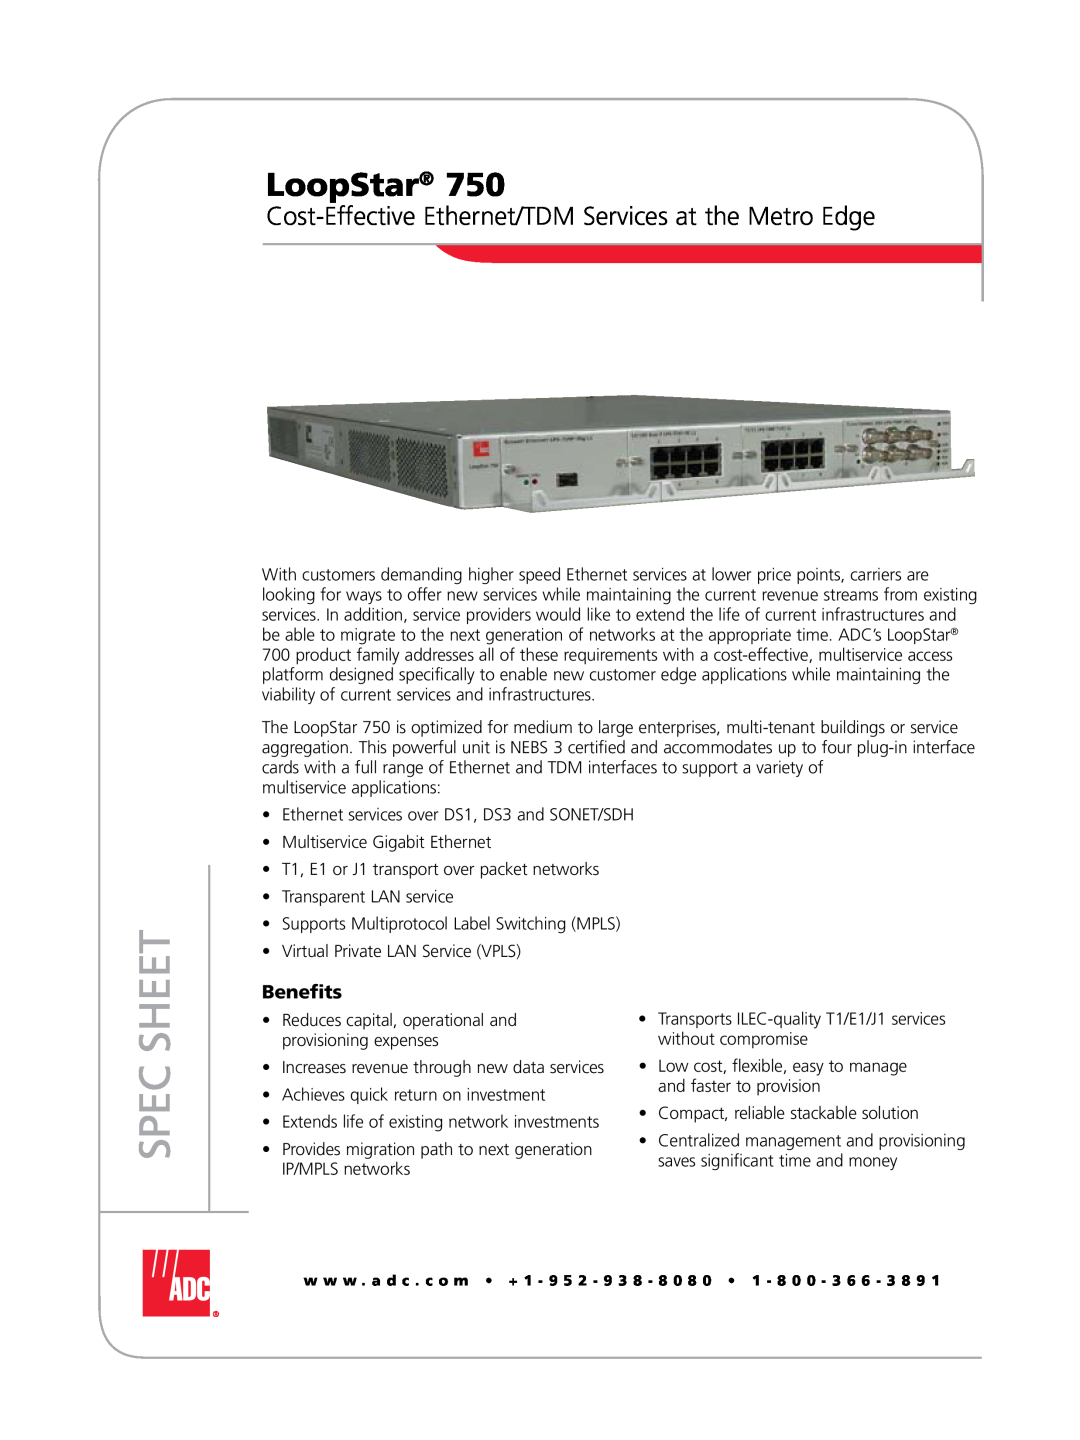 ADC 750 manual LoopStar, Cost-Effective Ethernet/TDM Services at the Metro Edge, Benefits, Spec Sheet 